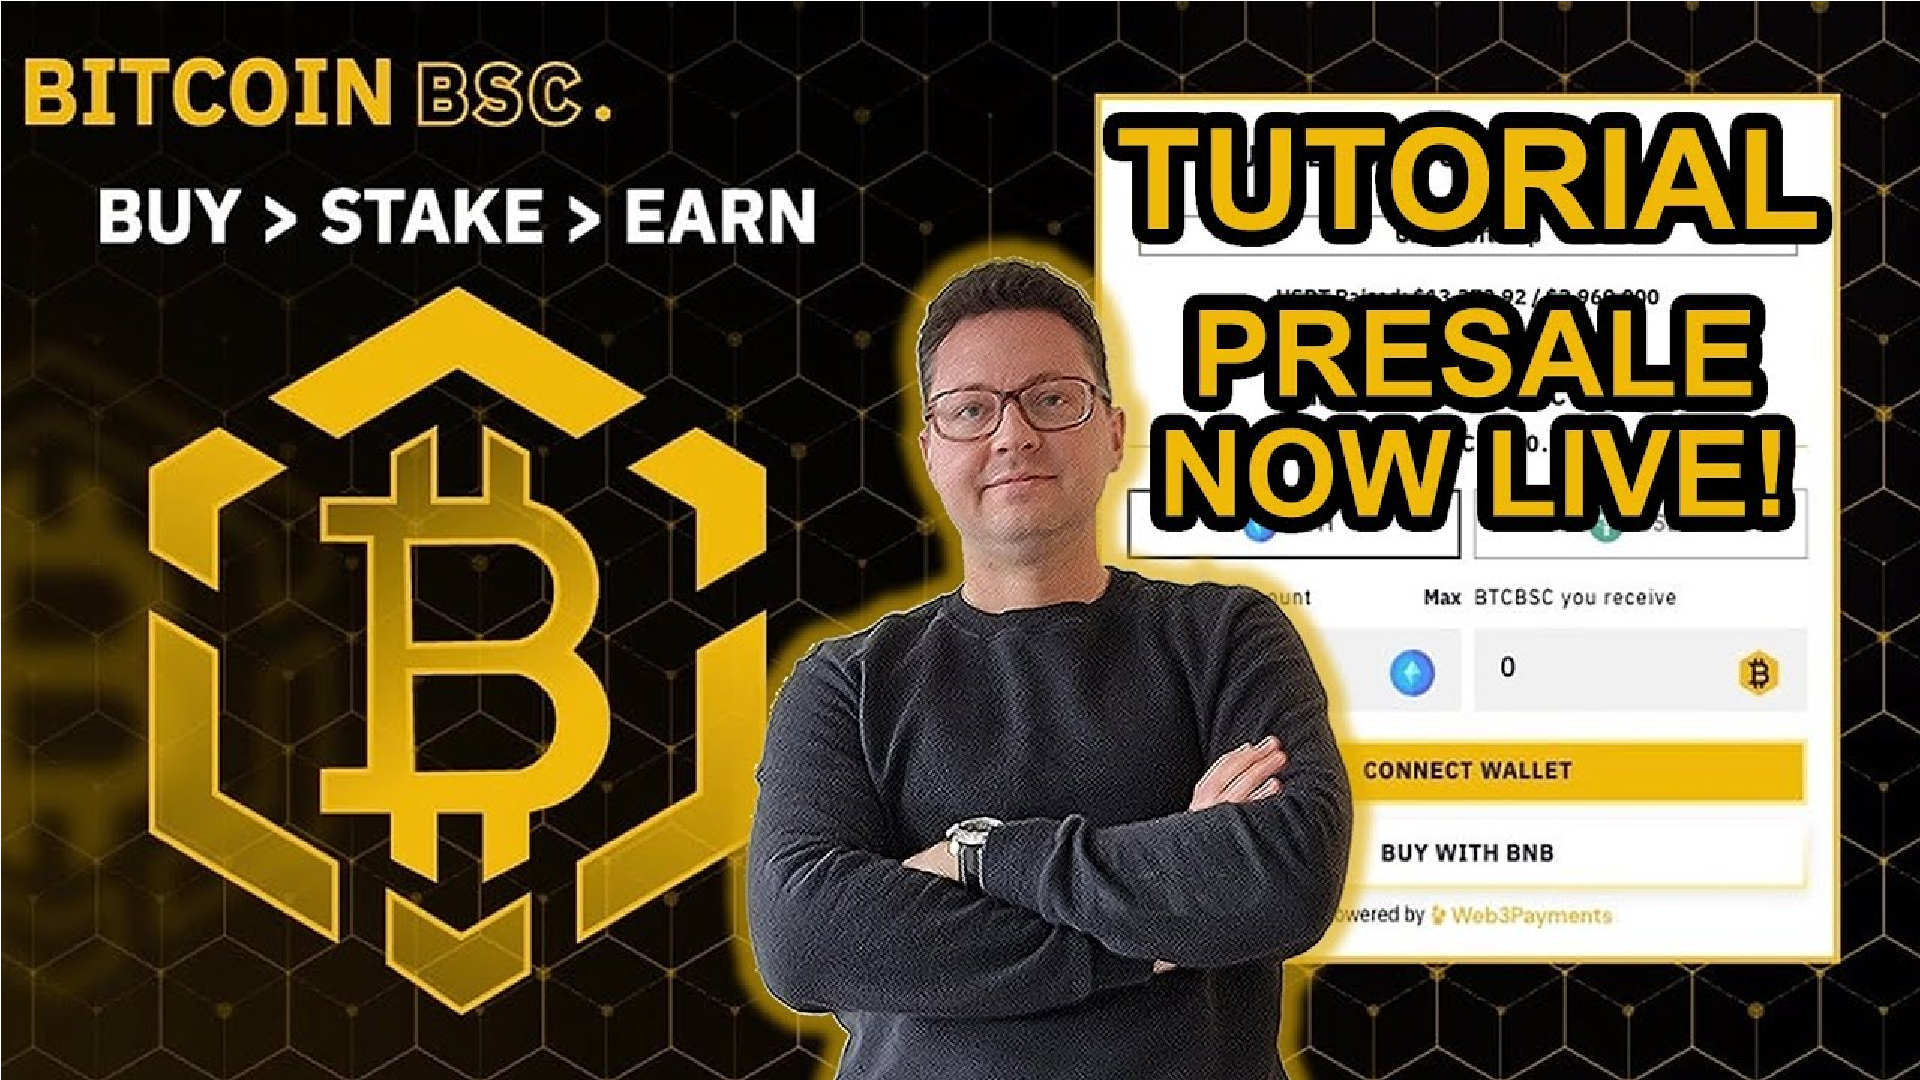 How To Buy Bitcoin BSC On Presale - Alessandro De Crypto Video Review